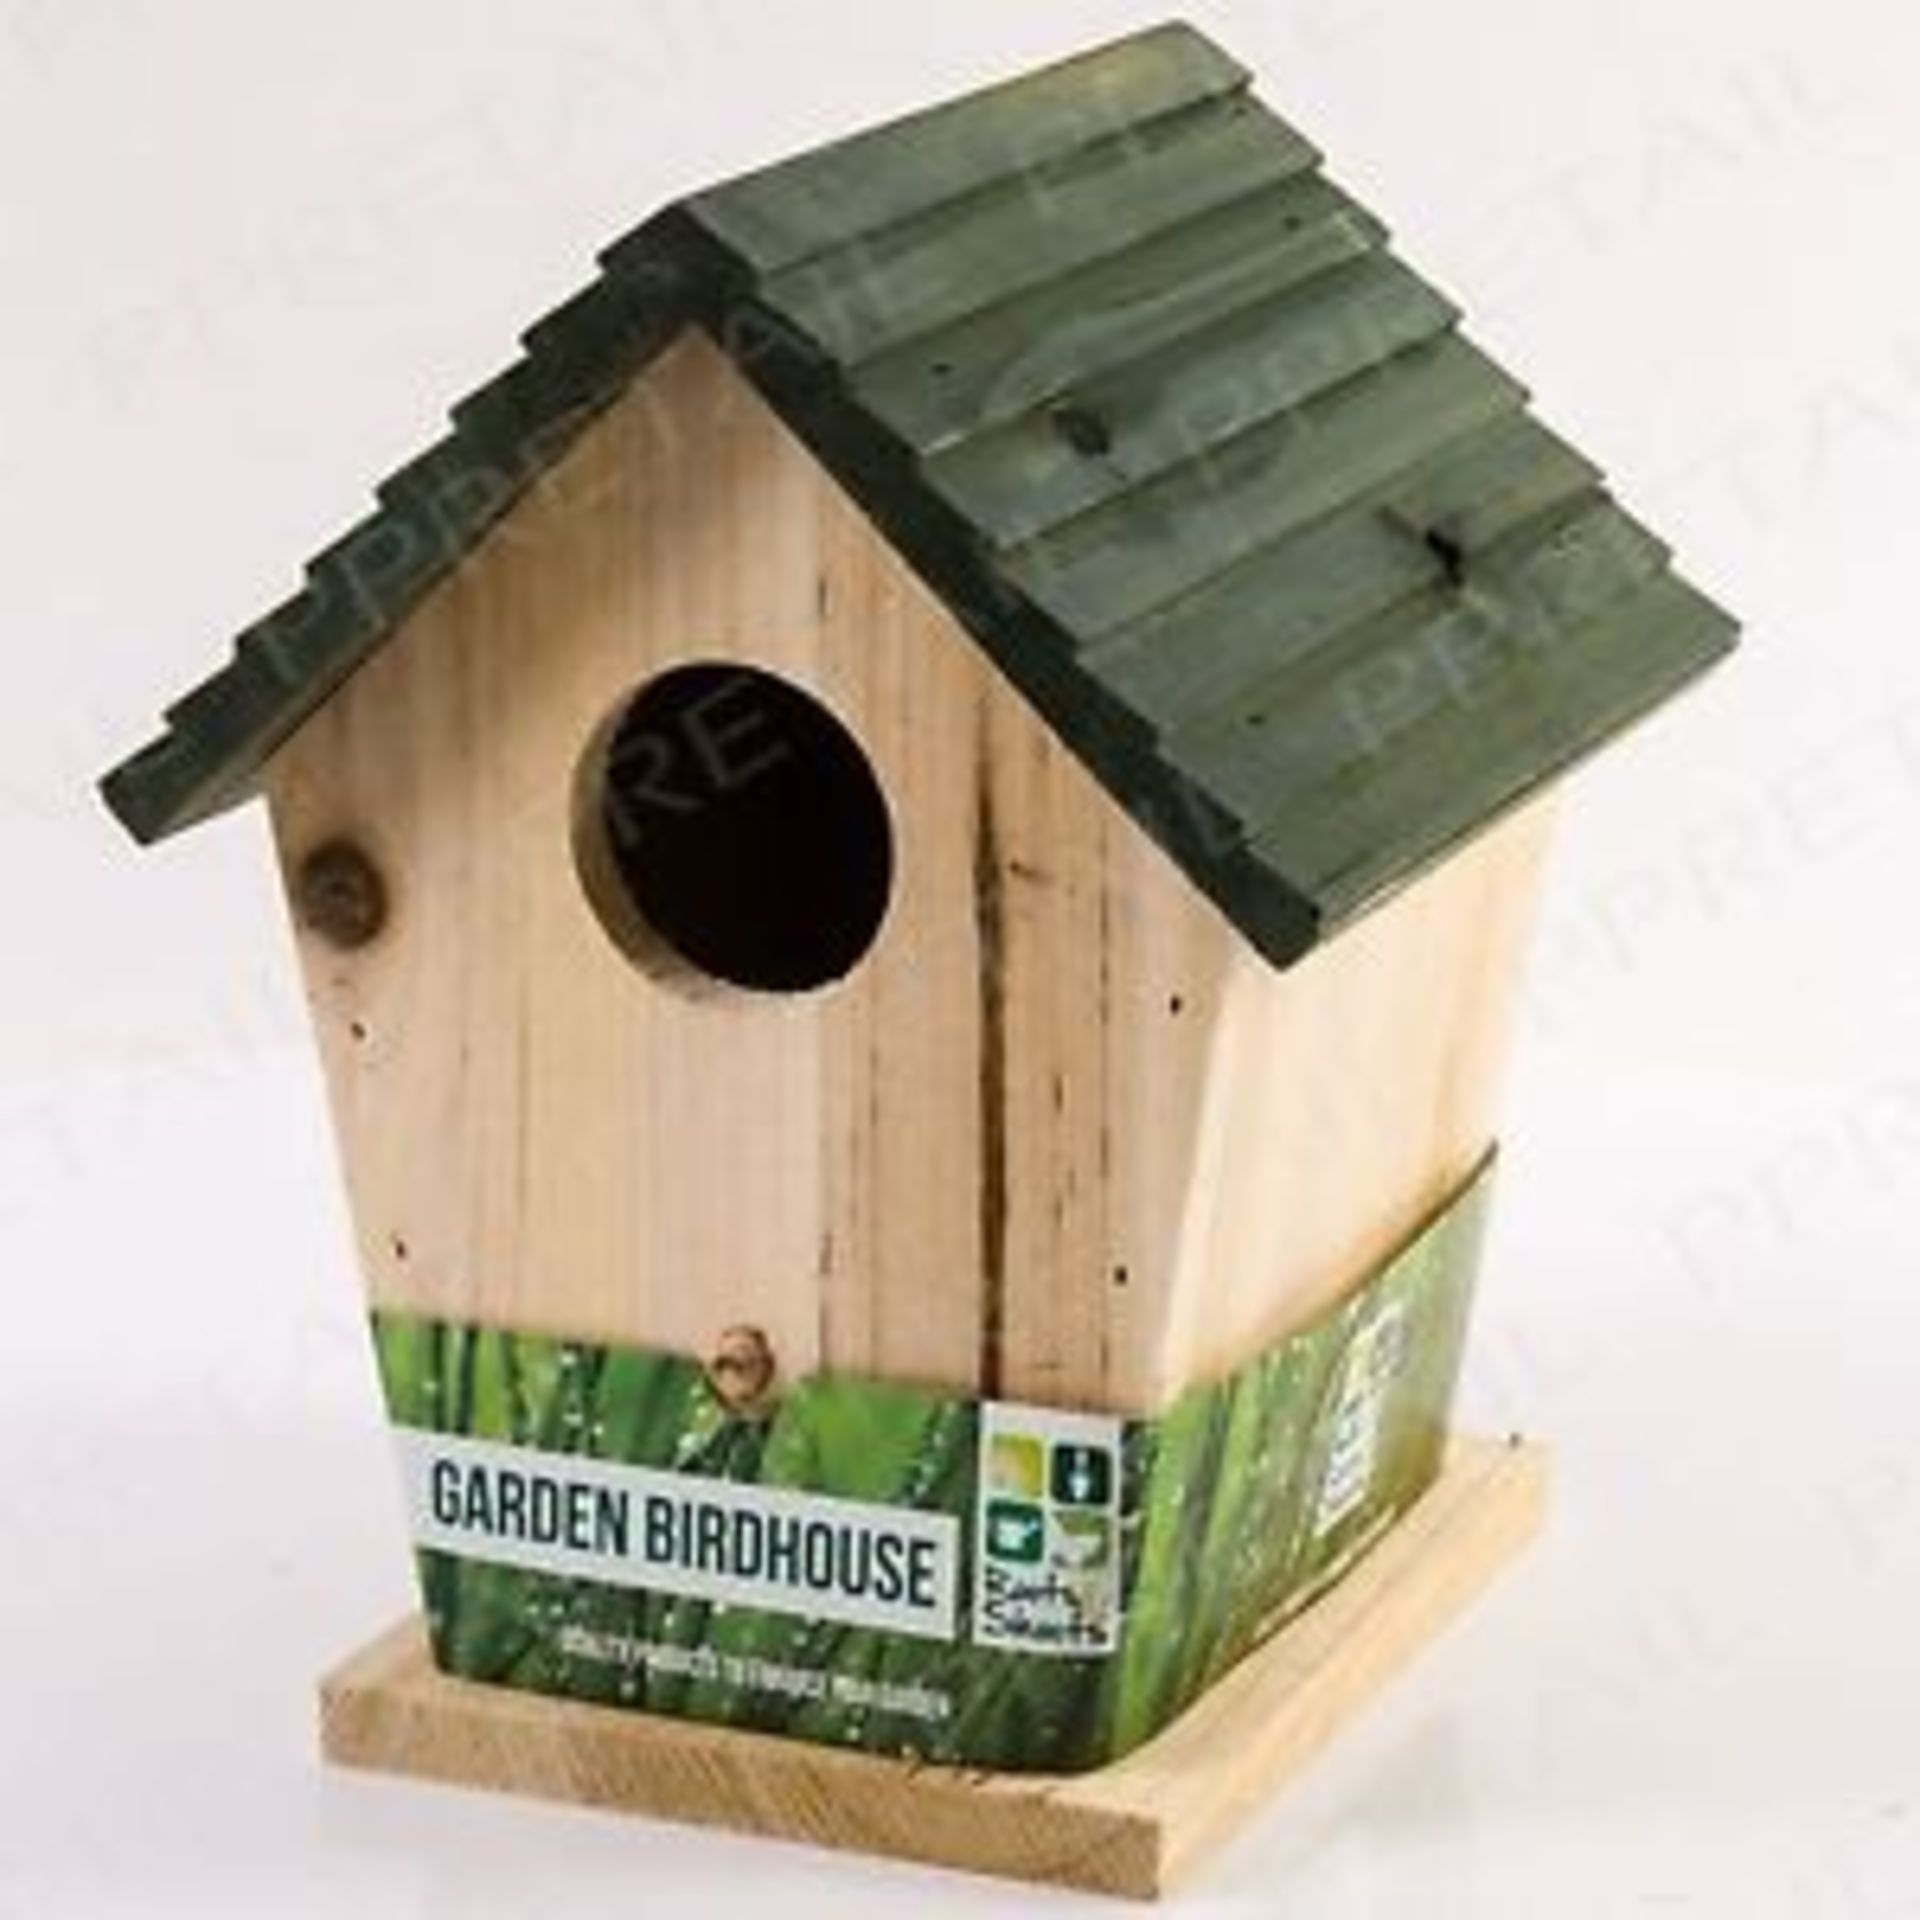 V Brand New Wooden Birdhouse With Pitched Roof And Perch X 2 YOUR BID PRICE TO BE MULTIPLIED BY TWO